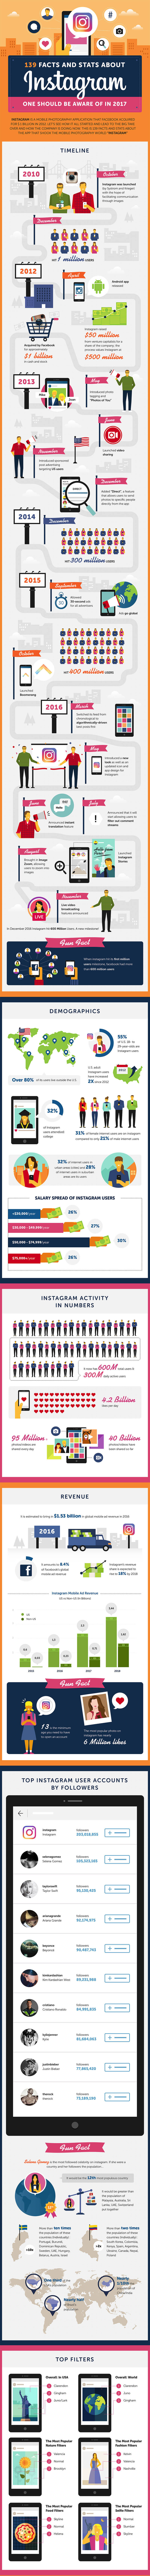 Instagram marketing facts infographic pt 1